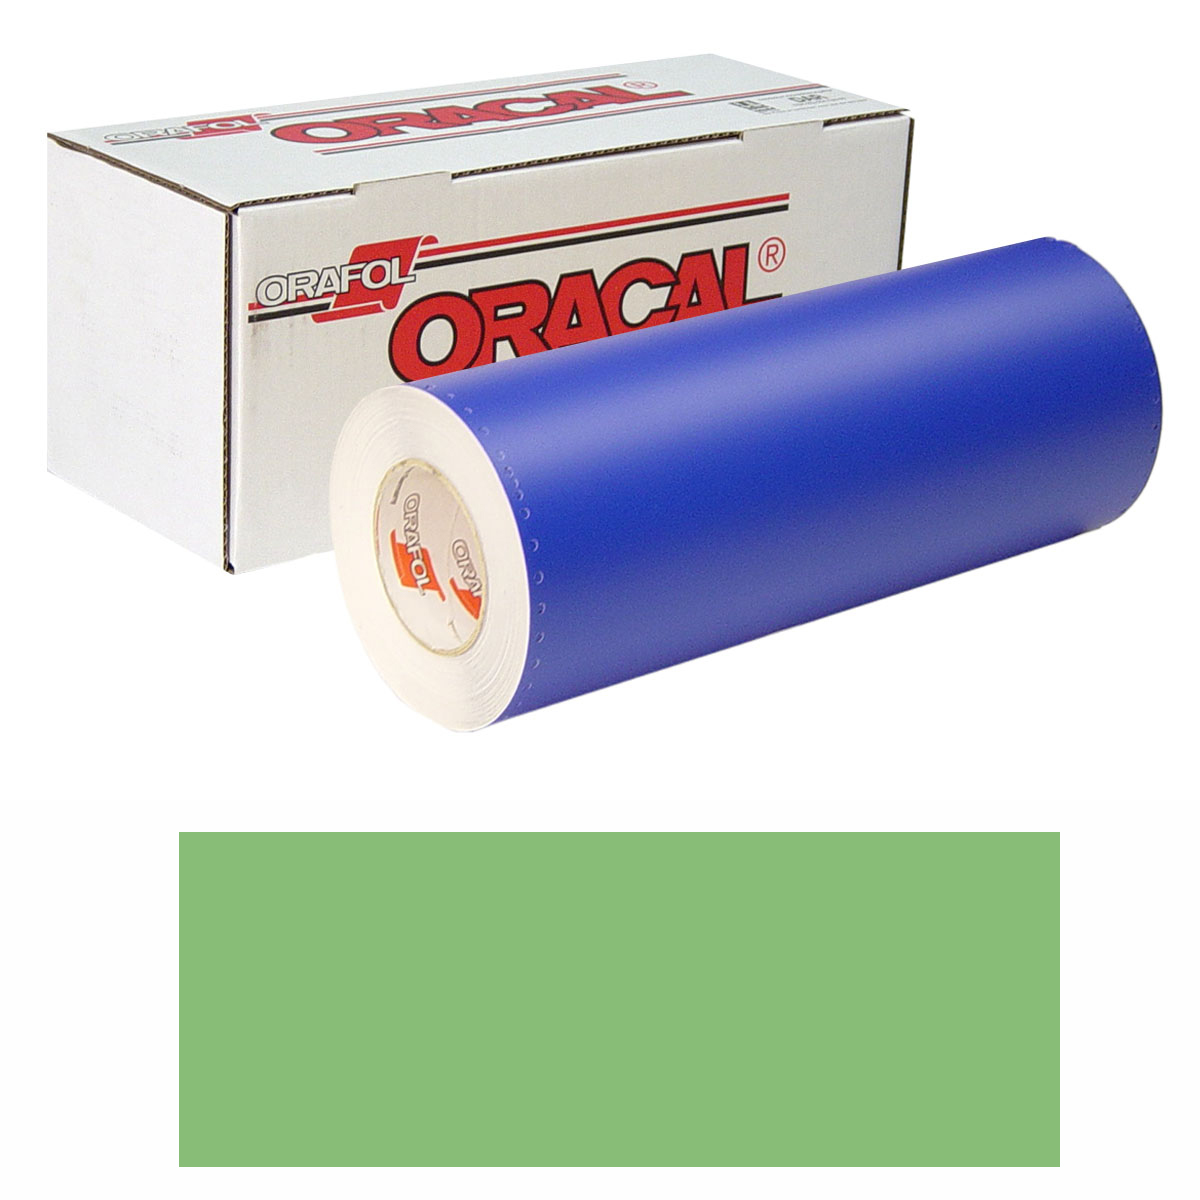 ORACAL 8300 30in X 50yd 063 Lime-Tree Green